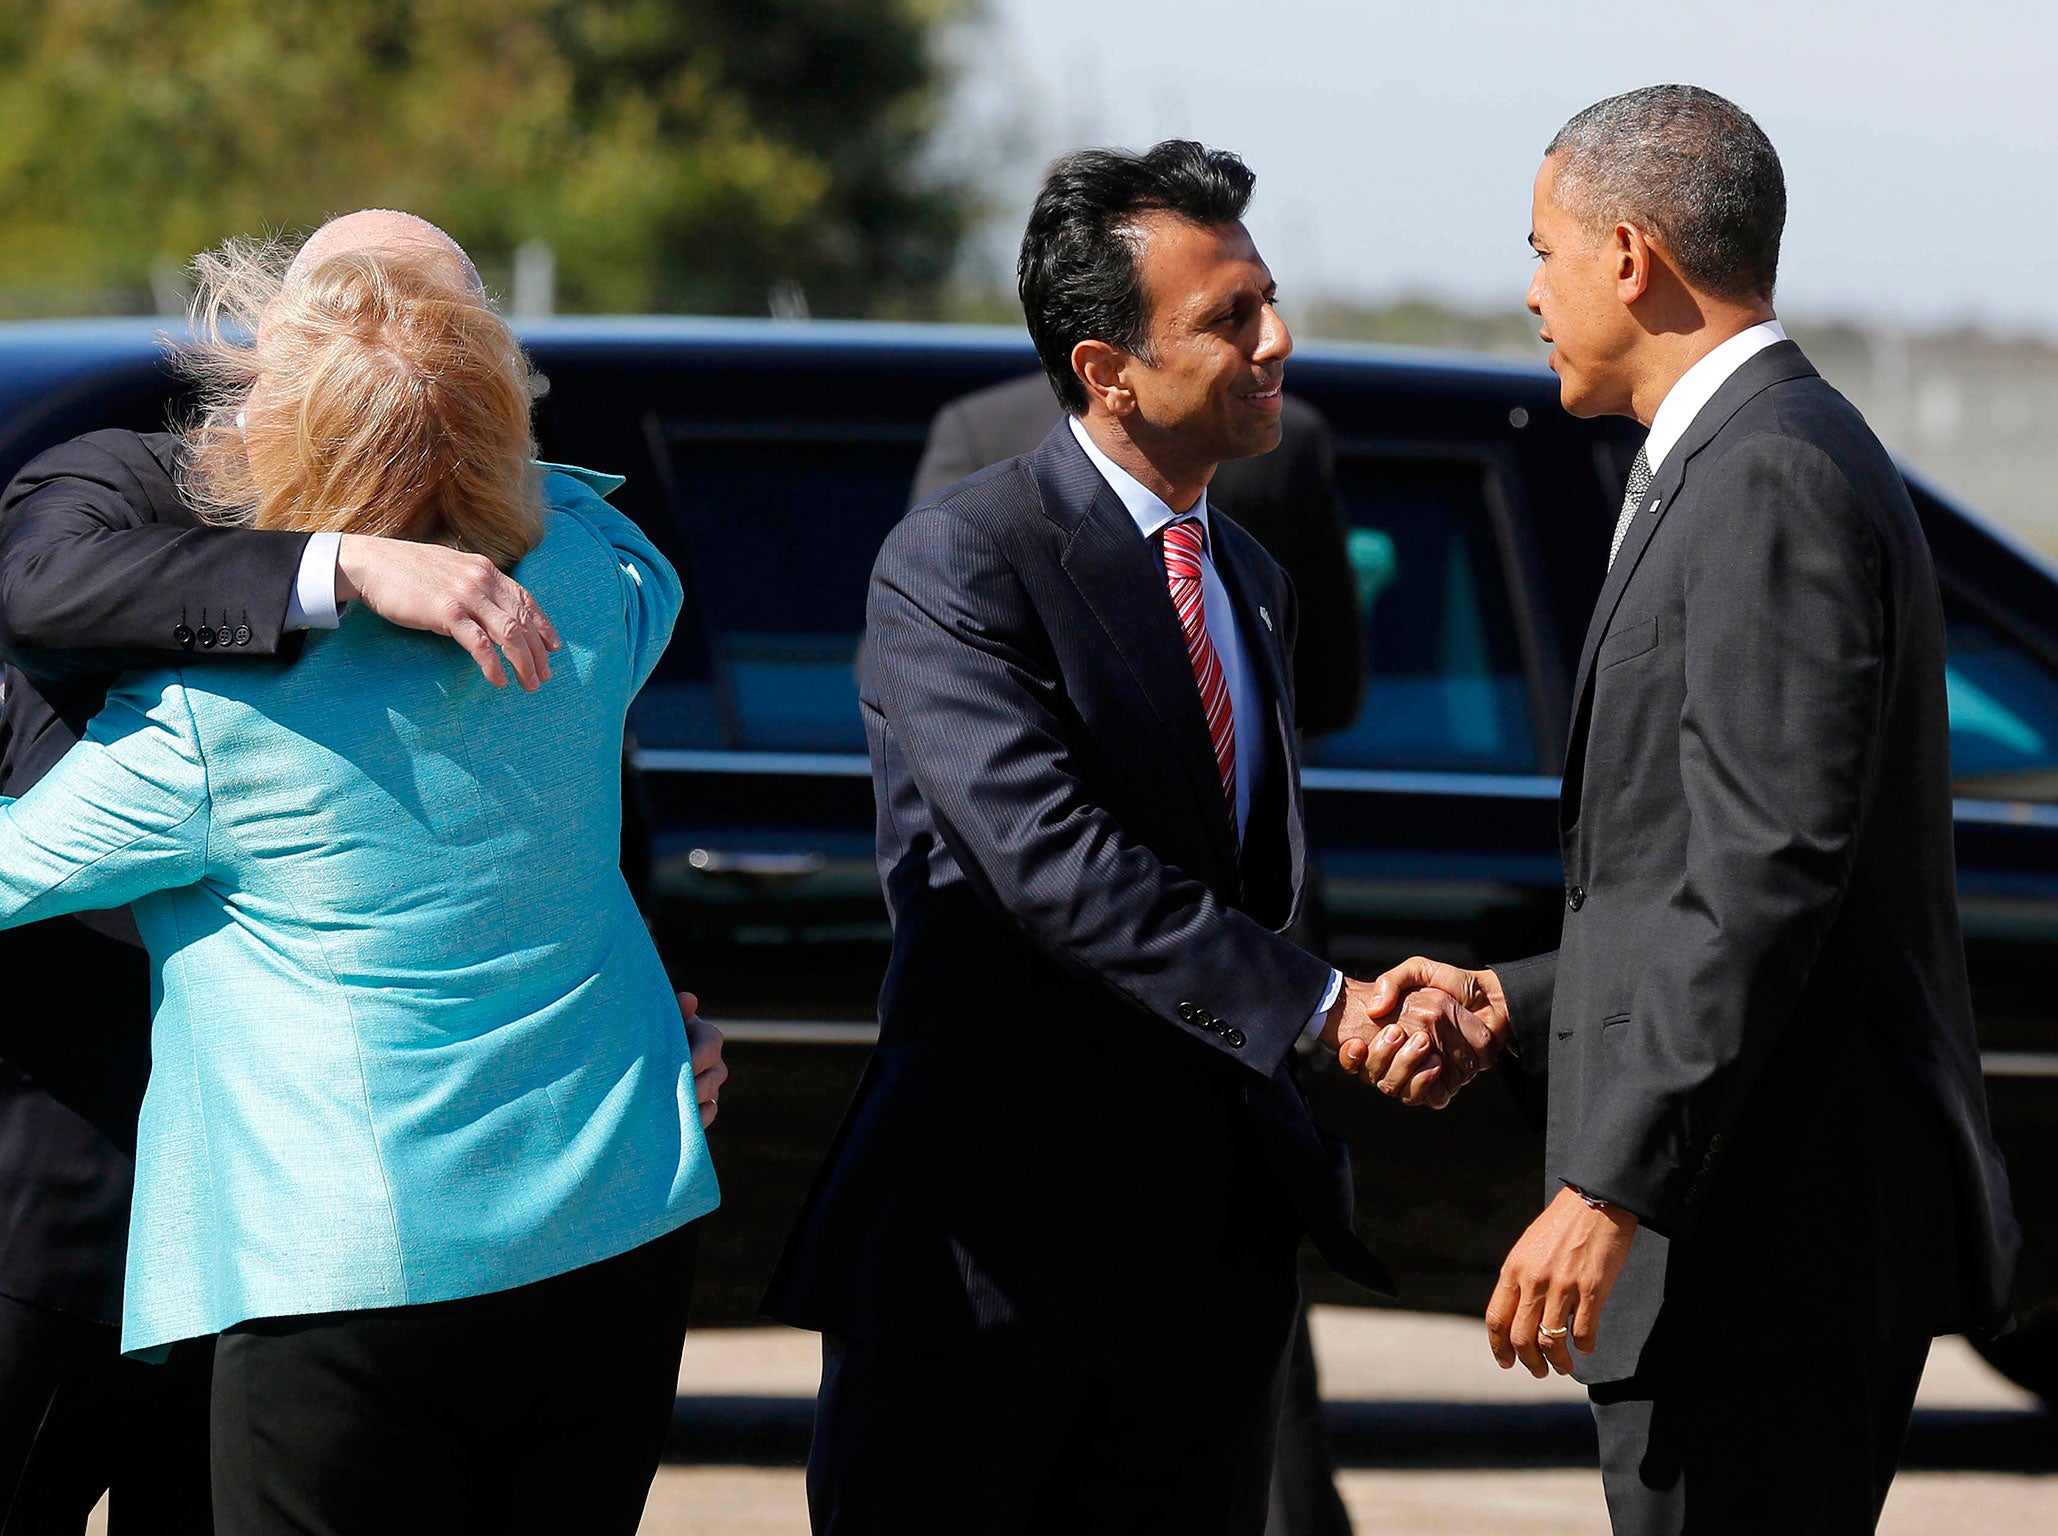 Bobby Jindal meets President Obama on official visit to Louisiana